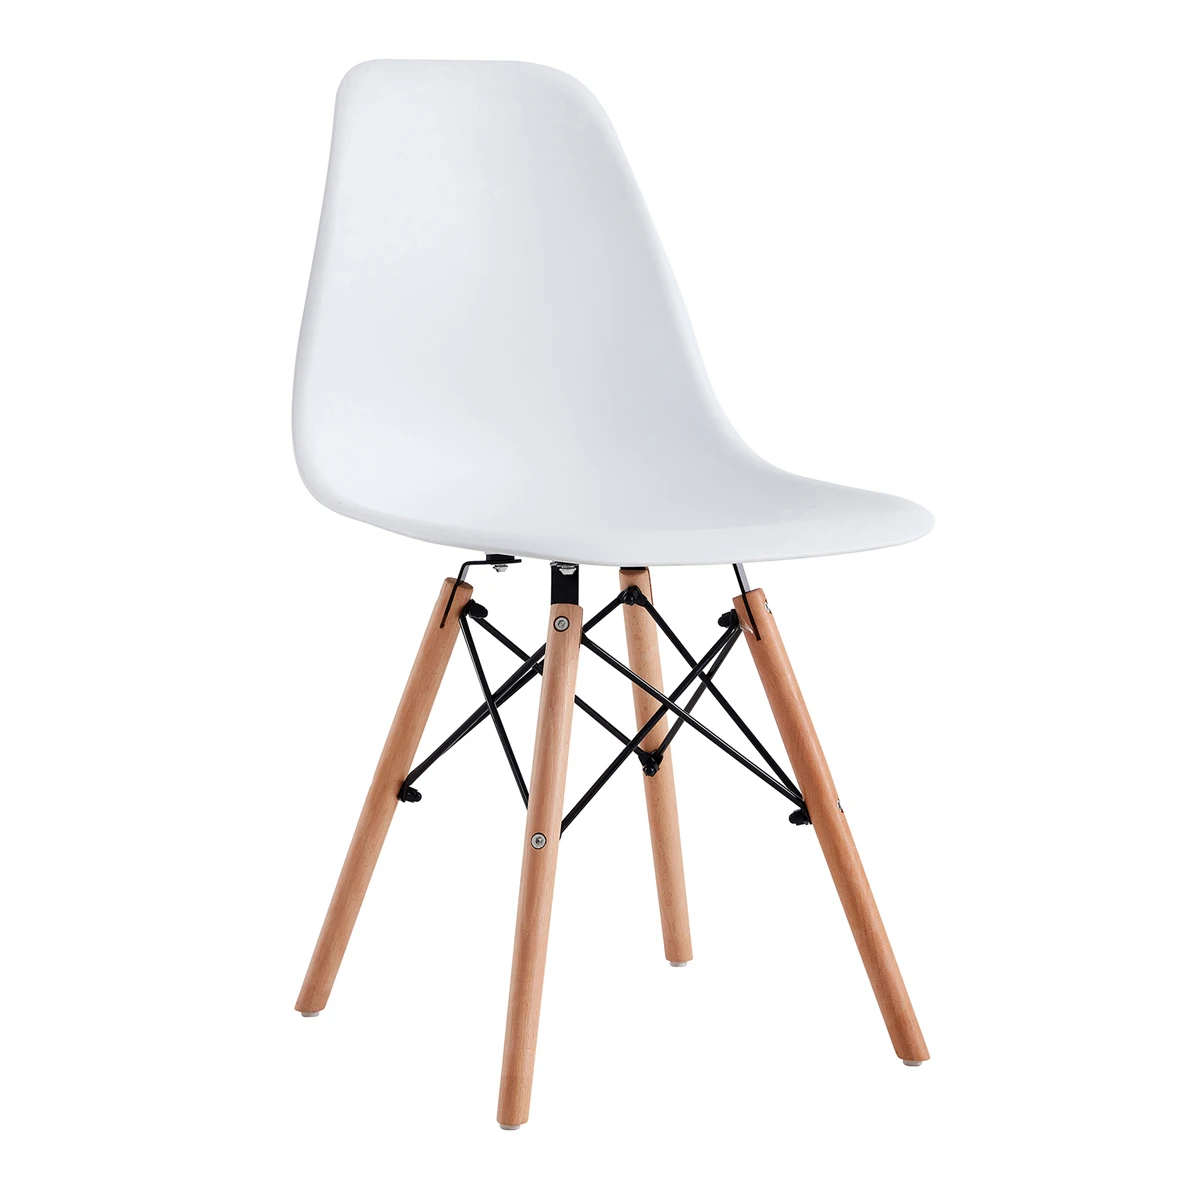 Creative Modern Wholesale NordIc Style Cafe Restaurant Dinner Chair White PP Plastic Dining Room Chairs with Wood Legs